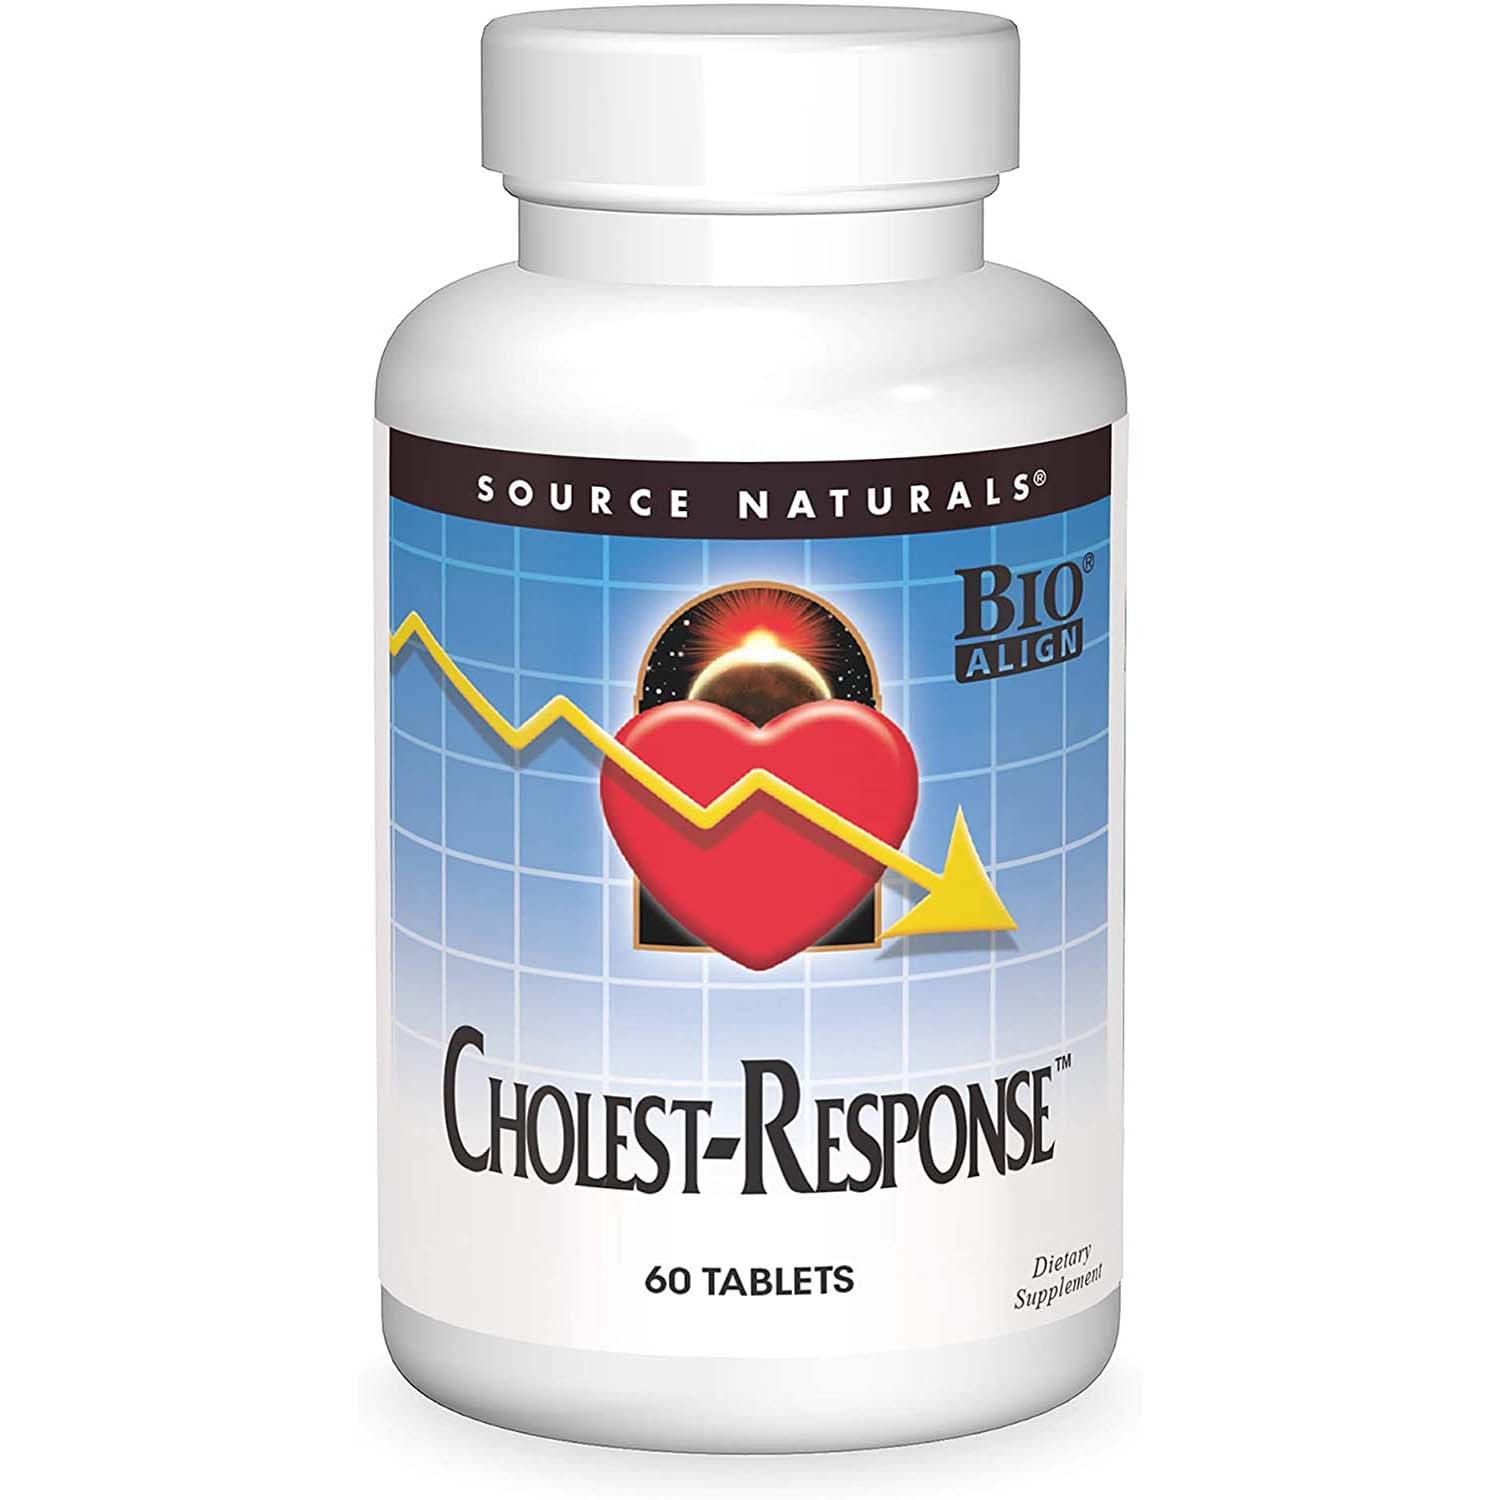 Source Natural Cholest Response, 60 Tablets